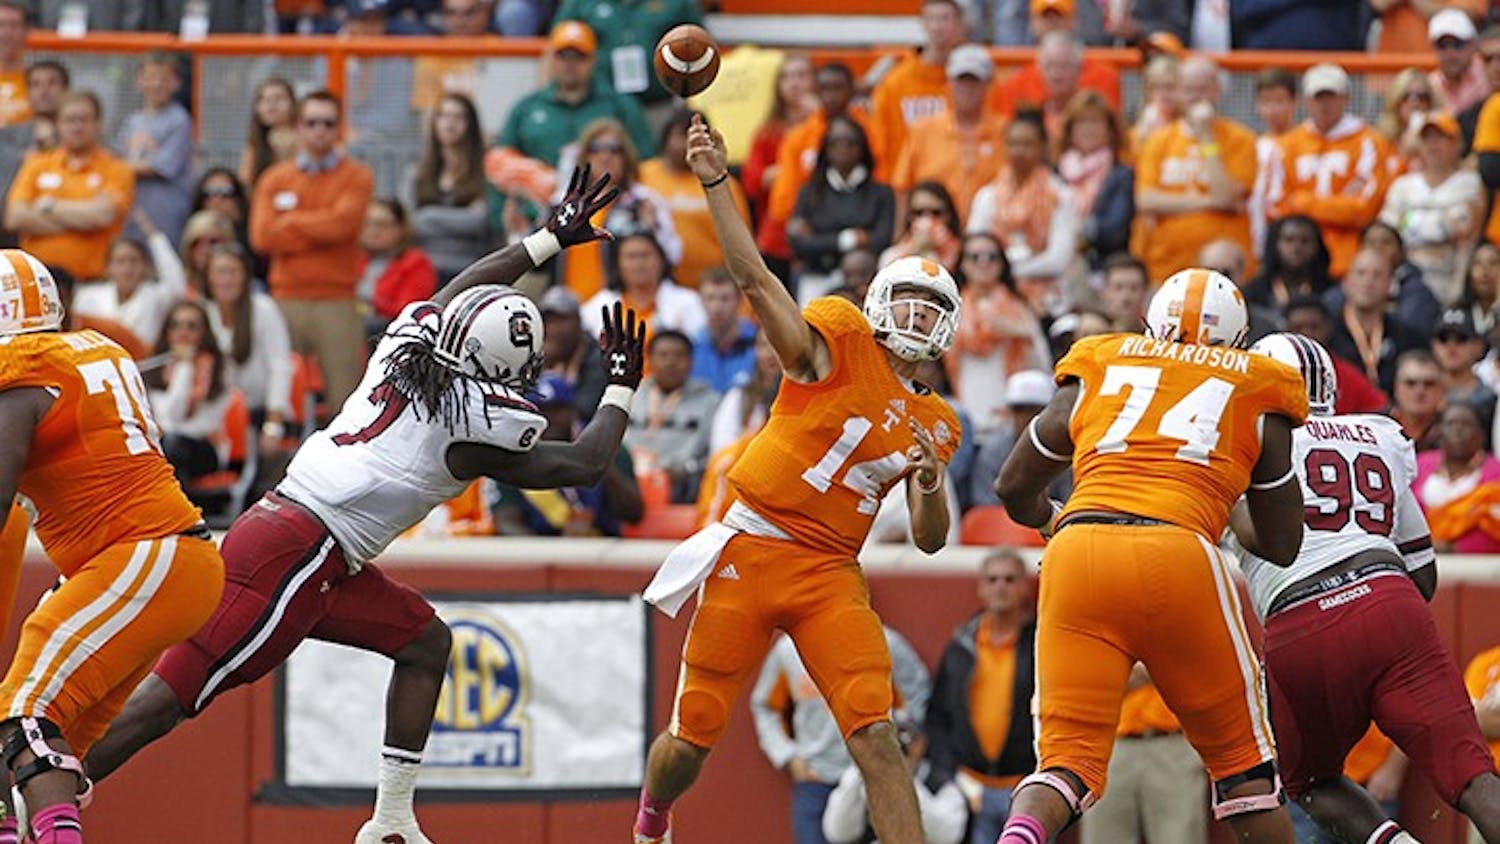 South Carolina Gamecocks defensive end Jadeveon Clowney (7) pressures Tennessee Volunteers quarterback Justin Worley (14) in the fourth quarter. The Tennessee Volunteers defeated the South Carolina Gamecocks, 23-21, at Neyland Stadium in Knoxville, Tennessee, on Saturday, October 19, 2013. (Gerry Melendez/The State/MCT)